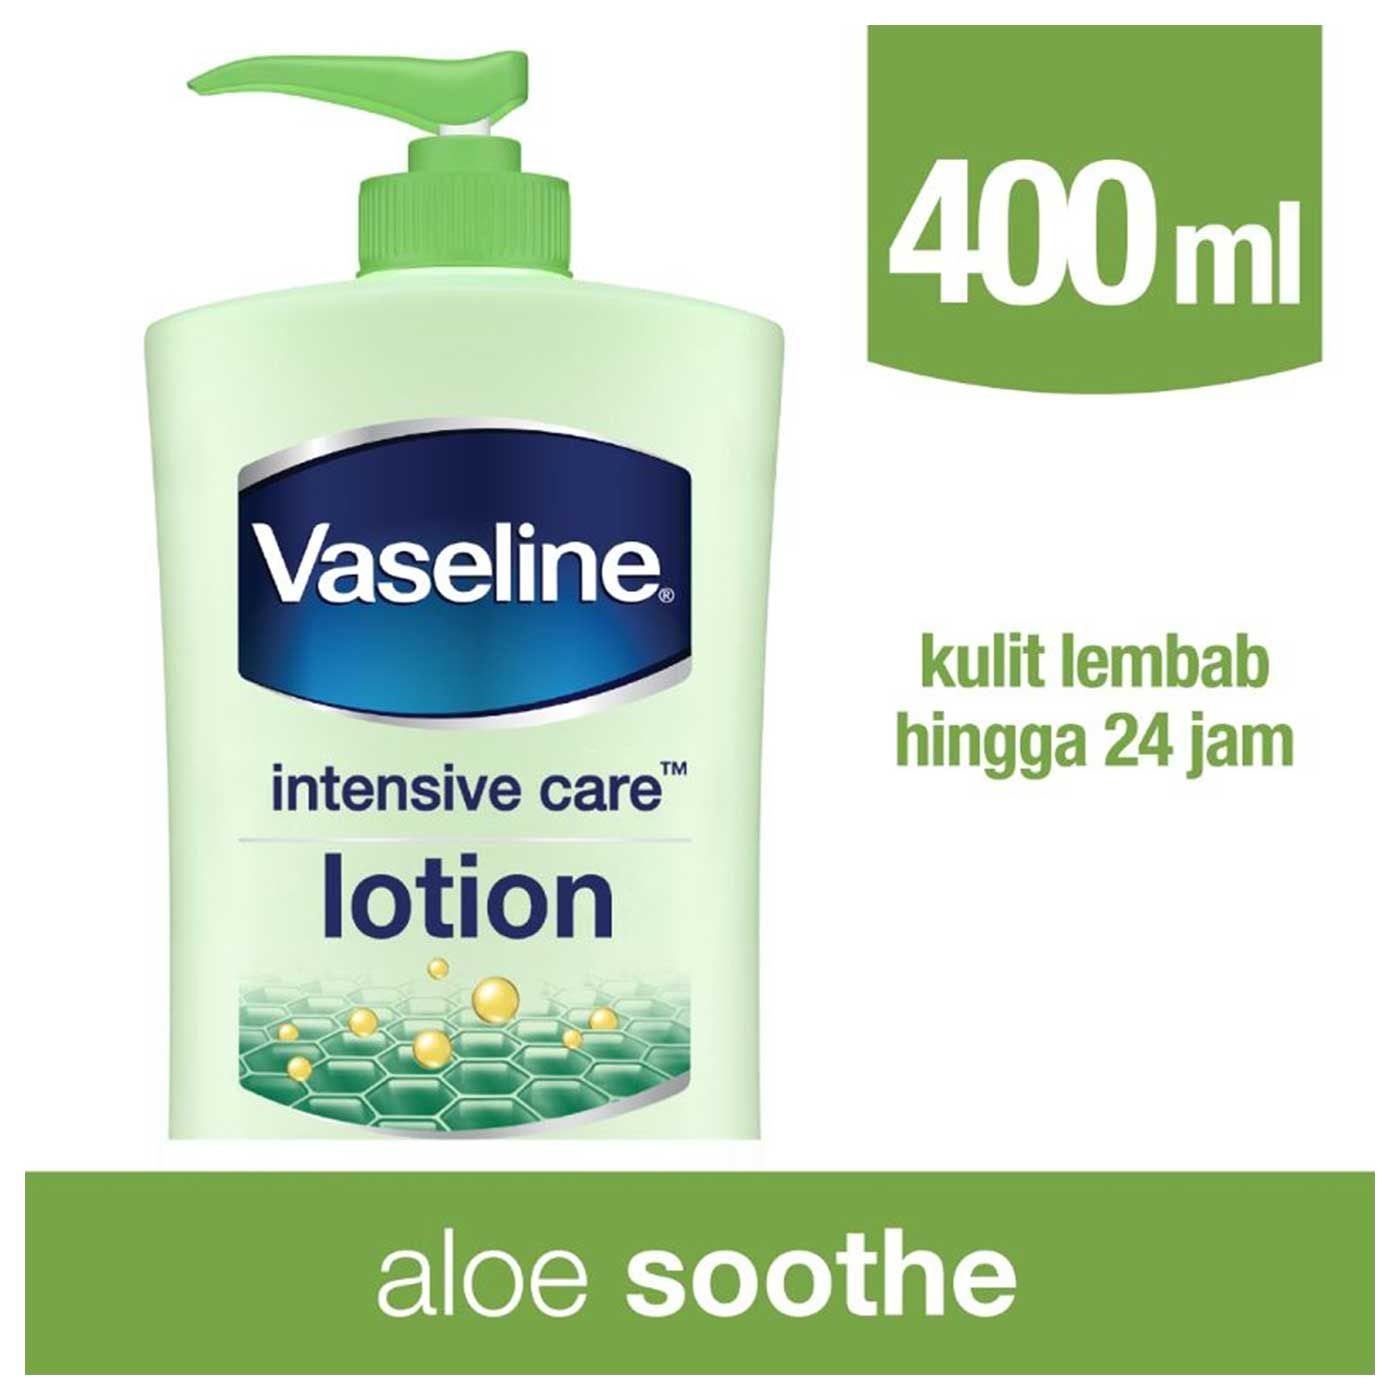 Vaseline Lotion Intensive Care Aloe Soothe 400ml - 1